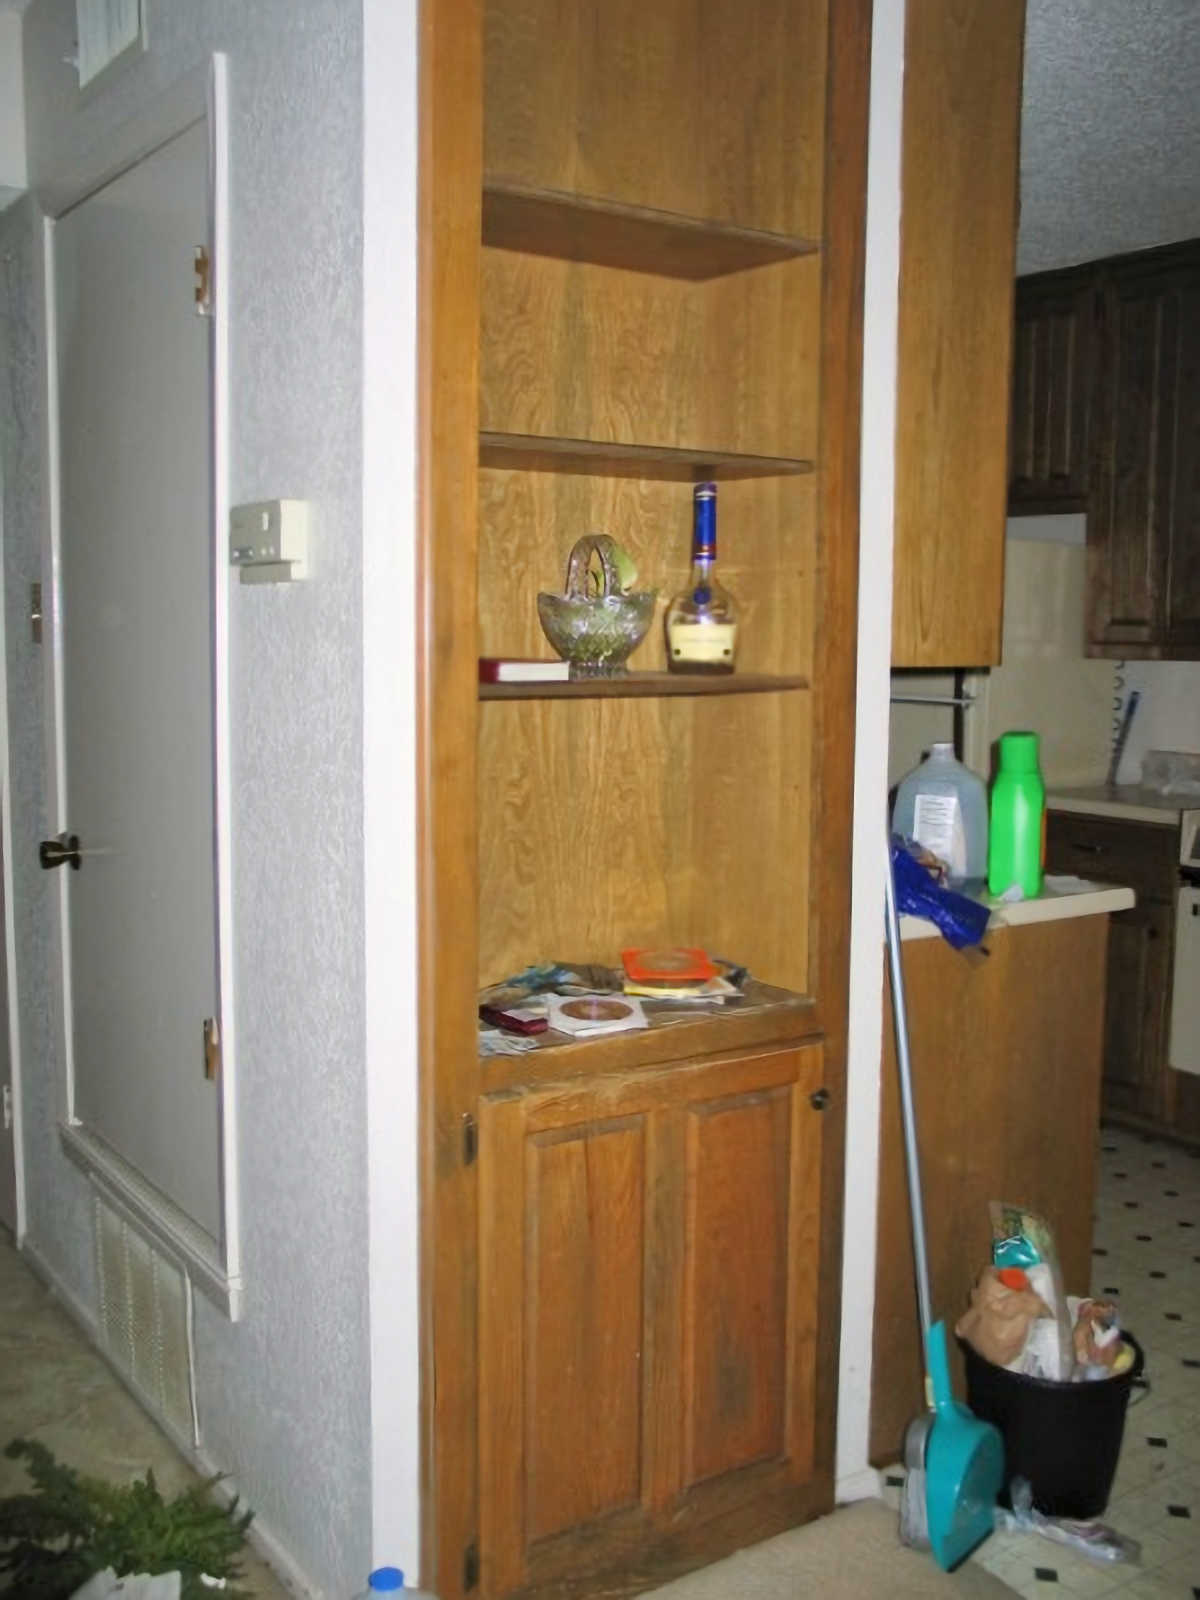 condo built-in bookshelves before remodel - bookcase near the kitchen was turned into a pantry